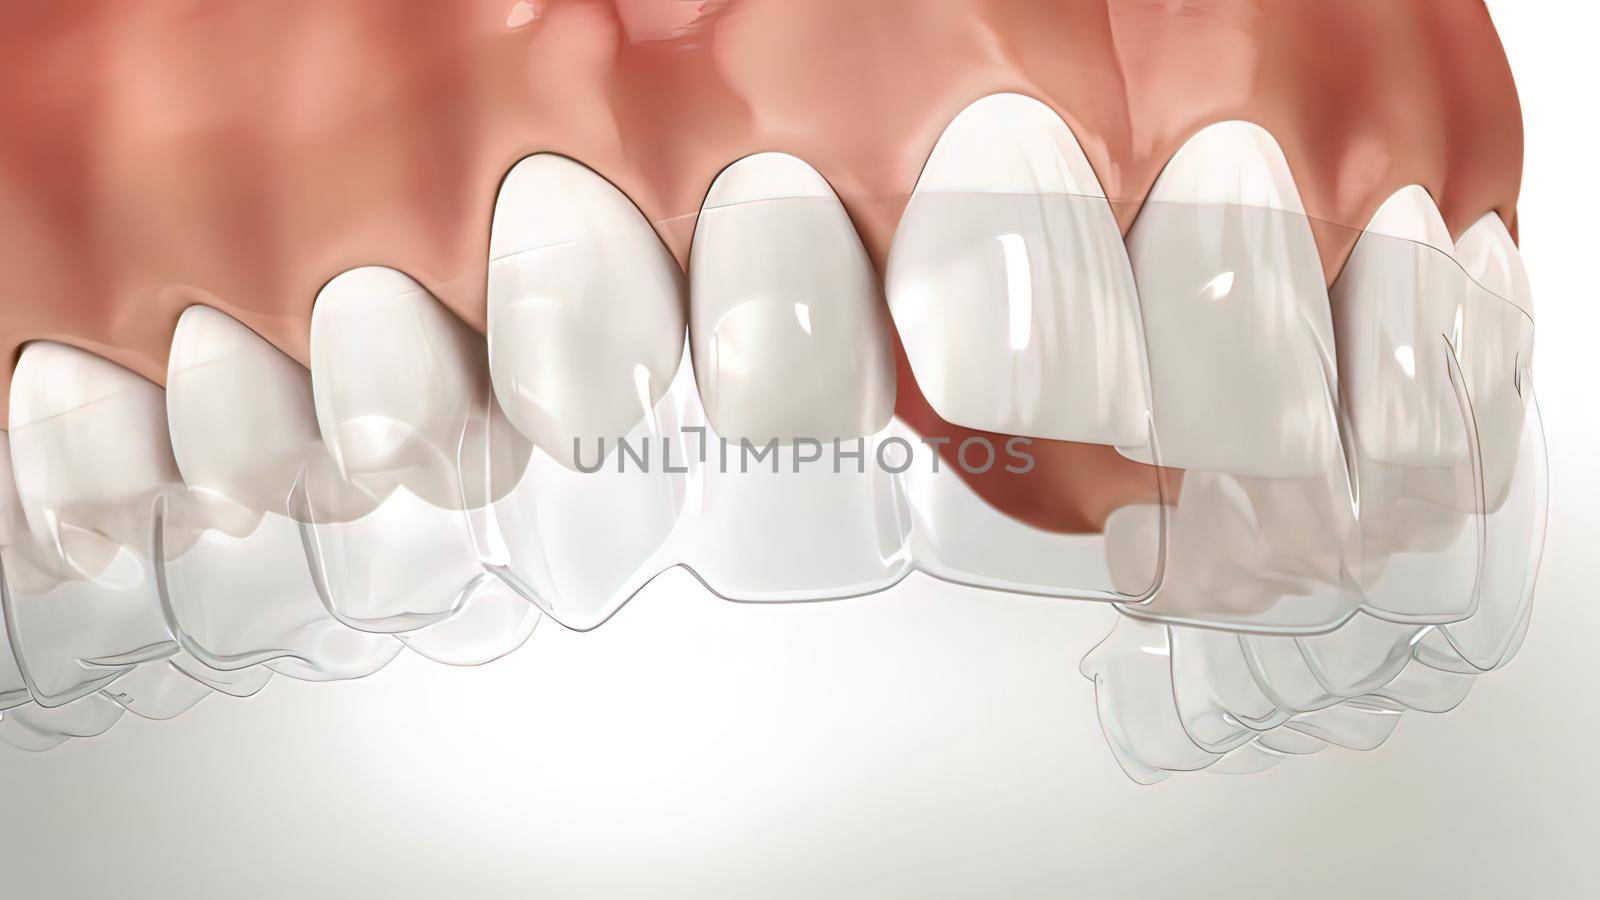 Invisalign braces or invisible retainer make bite correction. Medically accurate by creativepic